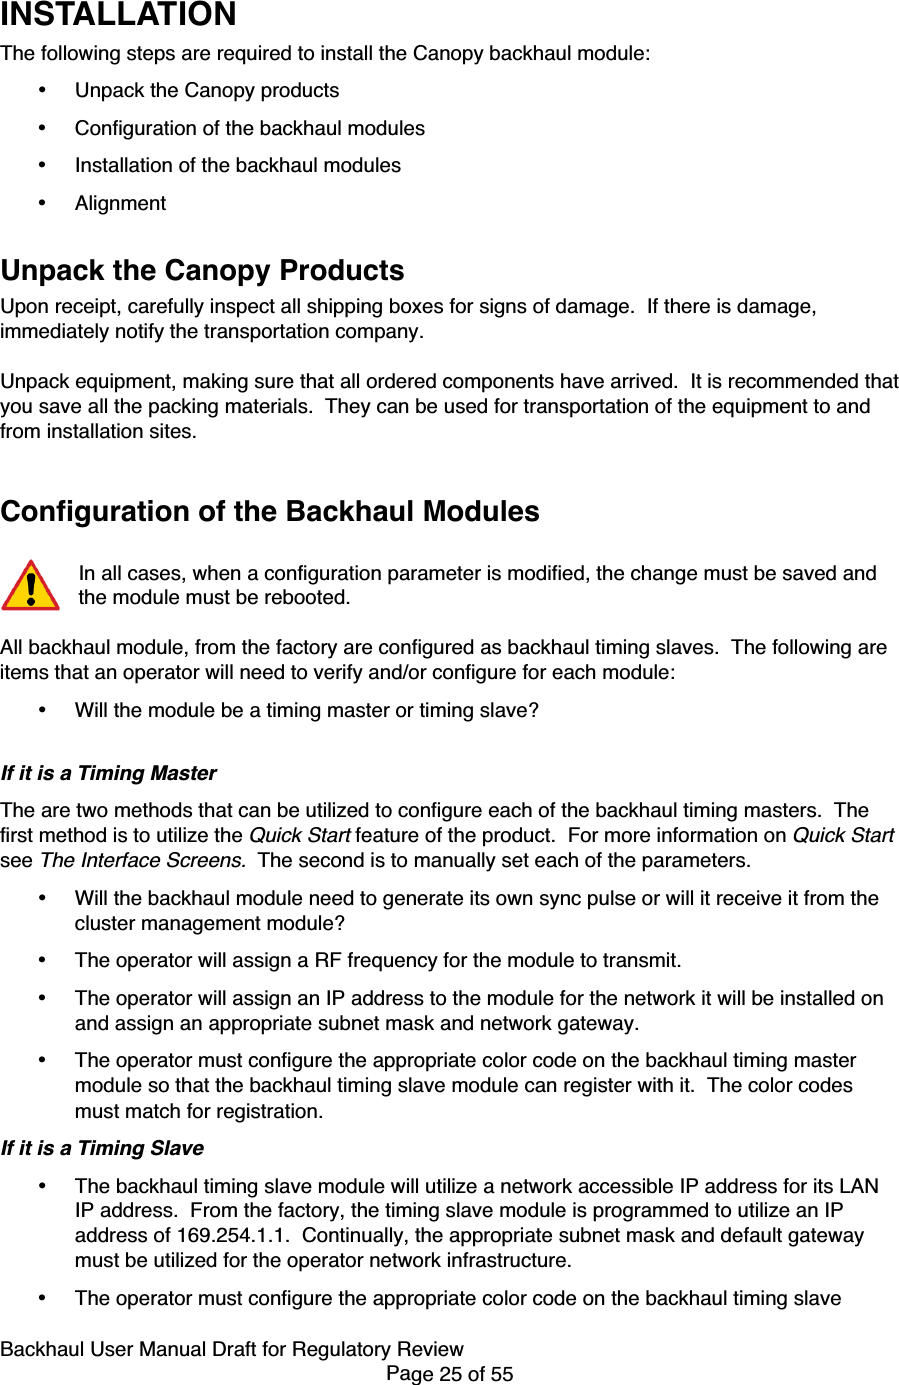 Backhaul User Manual Draft for Regulatory ReviewPage 25 of 55INSTALLATIONThe following steps are required to install the Canopy backhaul module:• Unpack the Canopy products• Configuration of the backhaul modules• Installation of the backhaul modules• AlignmentUnpack the Canopy ProductsUpon receipt, carefully inspect all shipping boxes for signs of damage.  If there is damage,immediately notify the transportation company.Unpack equipment, making sure that all ordered components have arrived.  It is recommended thatyou save all the packing materials.  They can be used for transportation of the equipment to andfrom installation sites.Configuration of the Backhaul ModulesIn all cases, when a configuration parameter is modified, the change must be saved andthe module must be rebooted.All backhaul module, from the factory are configured as backhaul timing slaves.  The following areitems that an operator will need to verify and/or configure for each module:• Will the module be a timing master or timing slave?If it is a Timing MasterThe are two methods that can be utilized to configure each of the backhaul timing masters.  Thefirst method is to utilize the Quick Start feature of the product.  For more information on Quick Startsee The Interface Screens.  The second is to manually set each of the parameters.• Will the backhaul module need to generate its own sync pulse or will it receive it from thecluster management module?• The operator will assign a RF frequency for the module to transmit.• The operator will assign an IP address to the module for the network it will be installed onand assign an appropriate subnet mask and network gateway.• The operator must configure the appropriate color code on the backhaul timing mastermodule so that the backhaul timing slave module can register with it.  The color codesmust match for registration.If it is a Timing Slave• The backhaul timing slave module will utilize a network accessible IP address for its LANIP address.  From the factory, the timing slave module is programmed to utilize an IPaddress of 169.254.1.1.  Continually, the appropriate subnet mask and default gatewaymust be utilized for the operator network infrastructure.• The operator must configure the appropriate color code on the backhaul timing slave